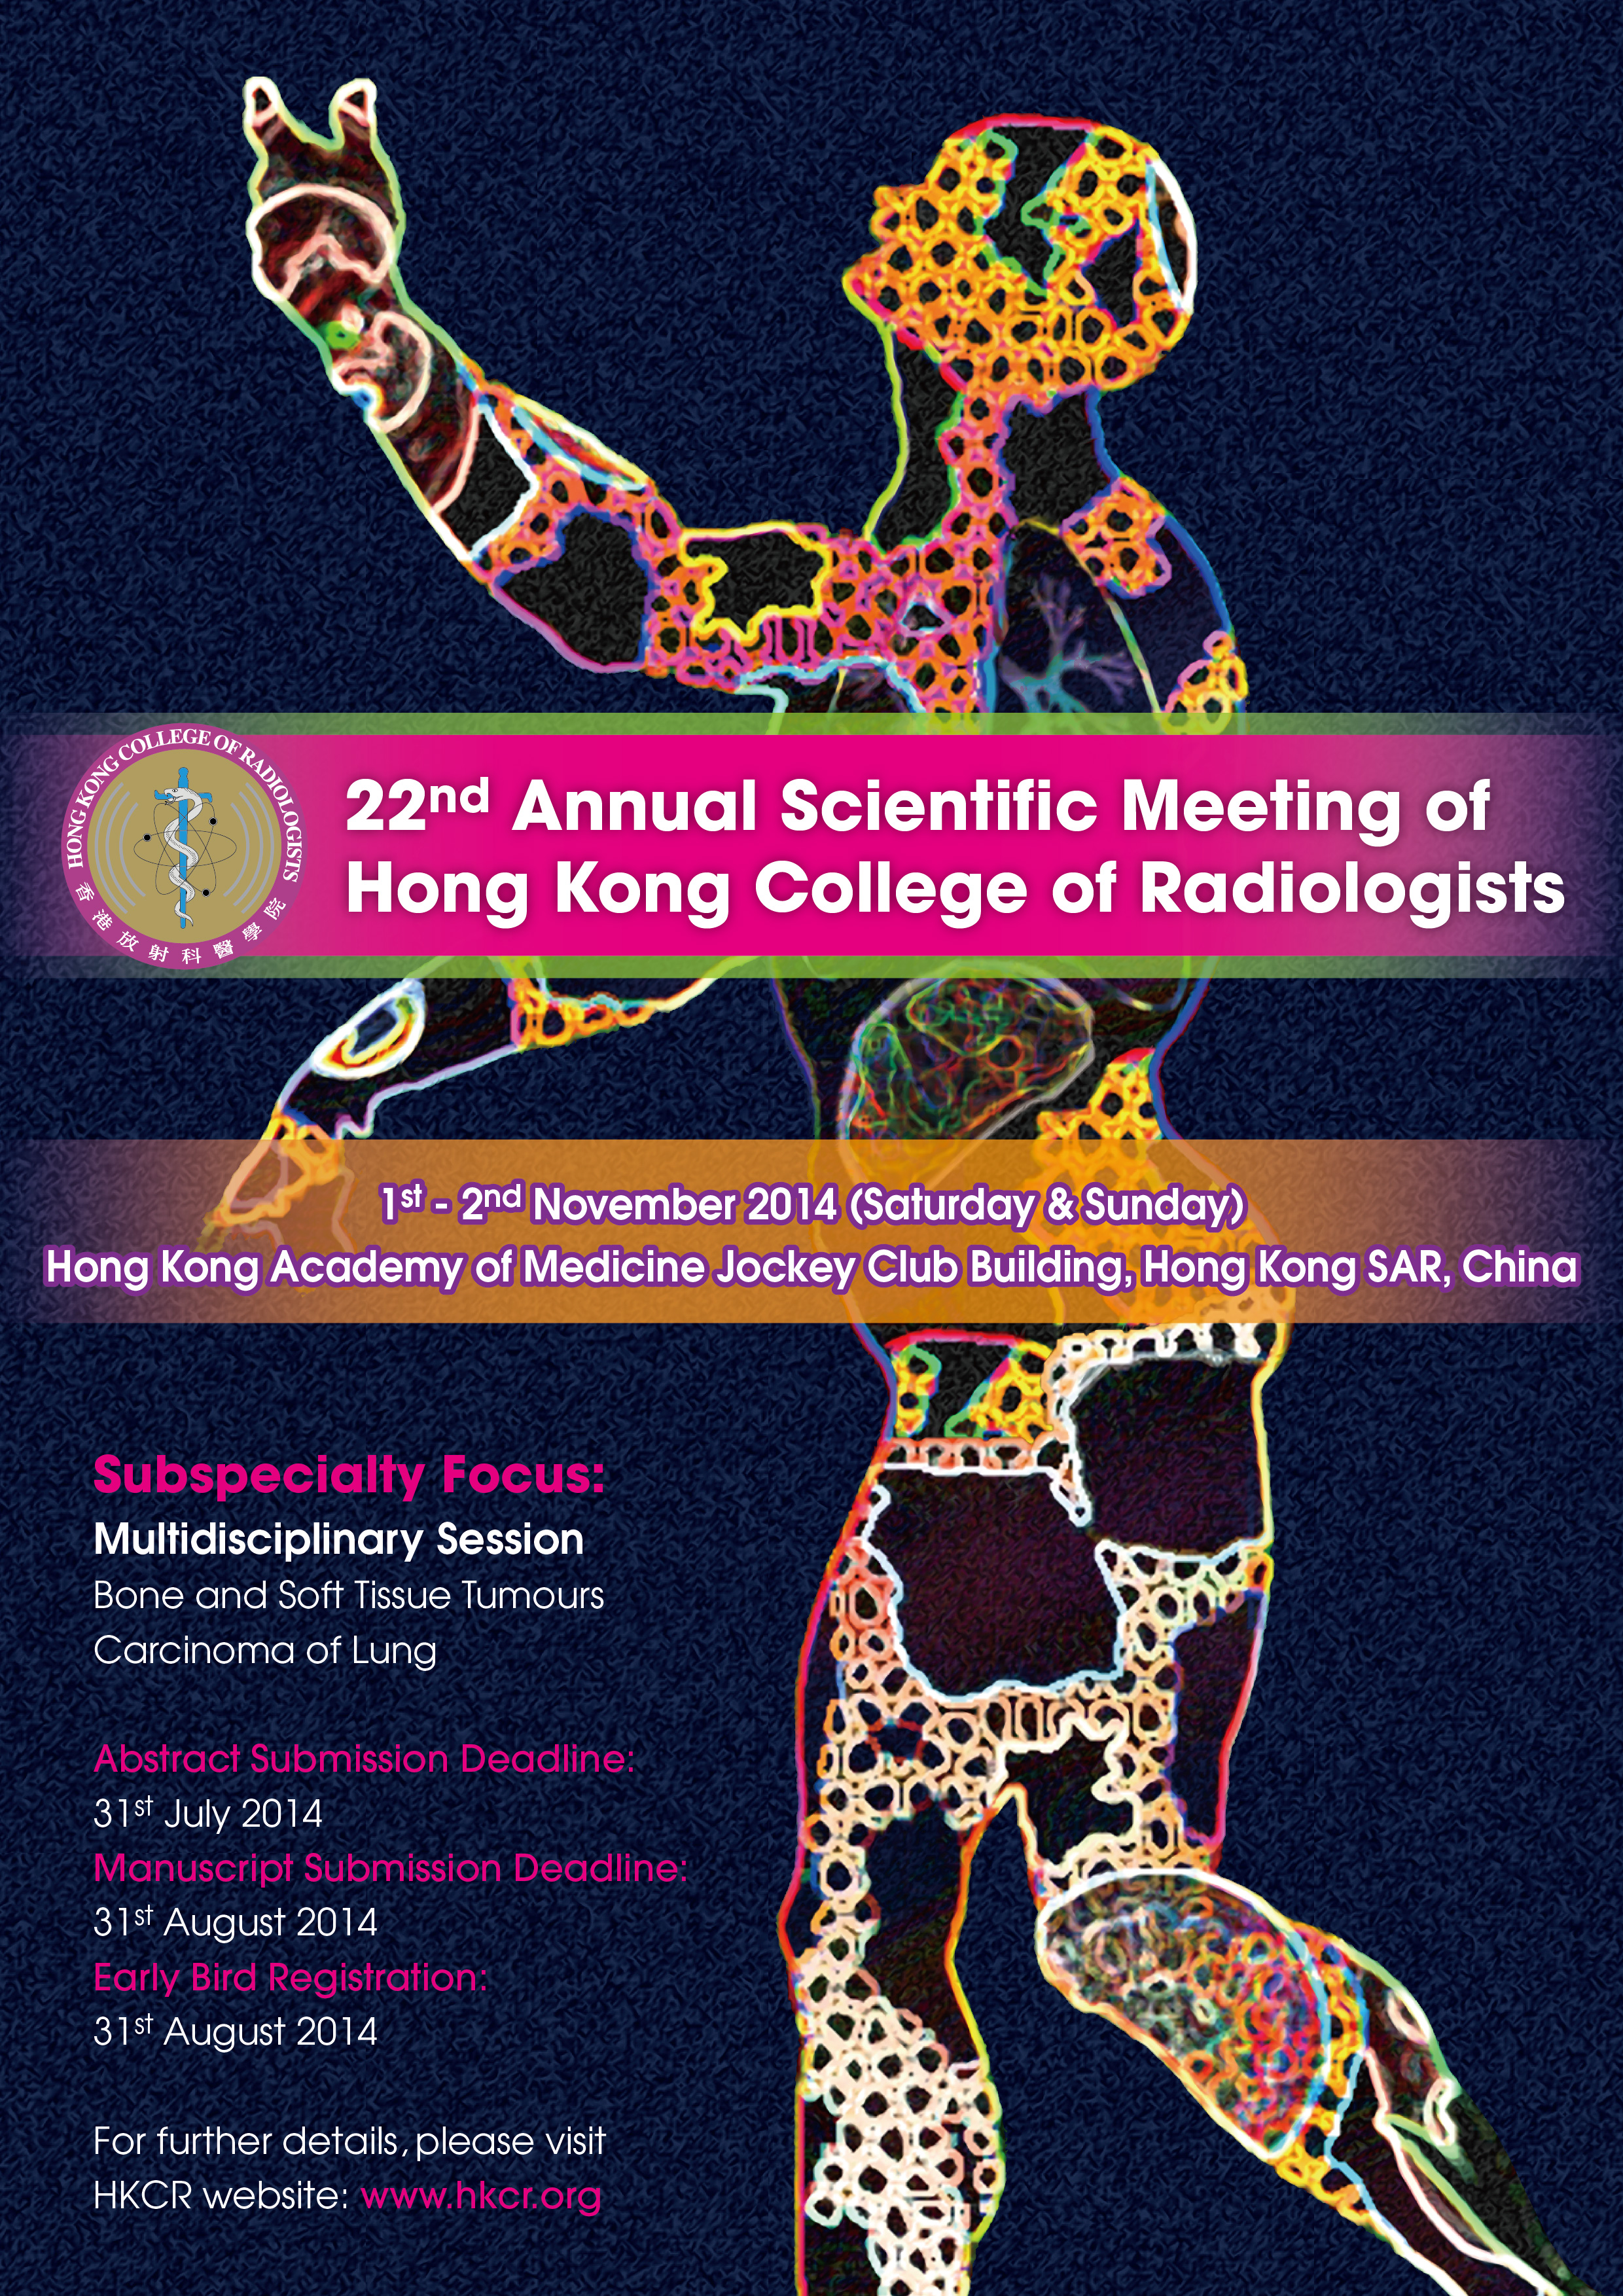 22nd Annual Scientific Meeting of Hong Kong College of Radiologists